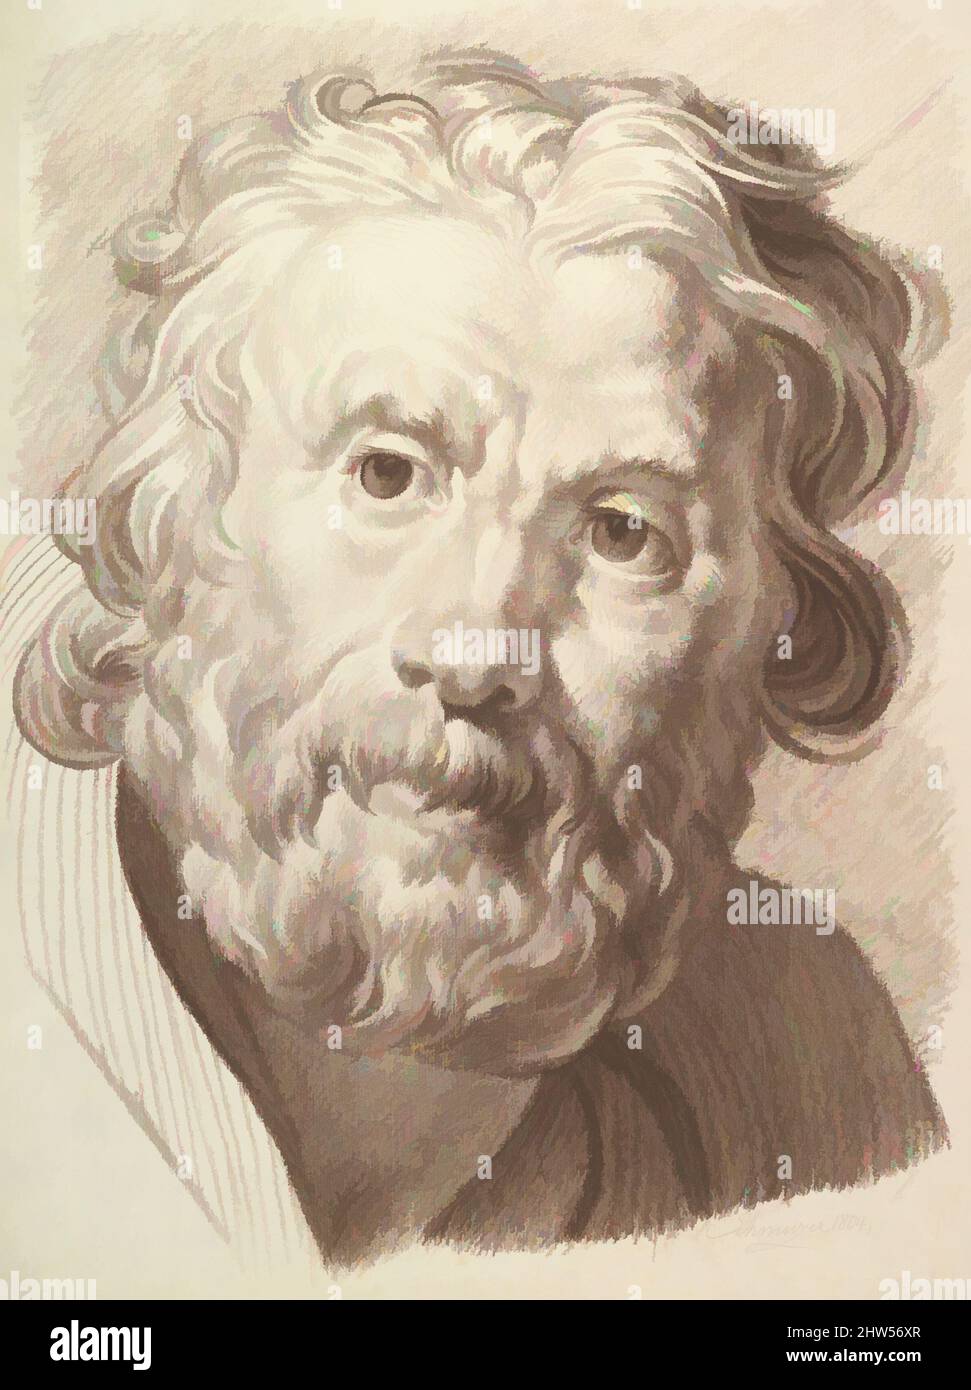 Art inspired by Head of Bearded Old Man, 1804, Brown chalk, sheet: 23 3/16 x 17 1/8 in. (58.9 x 43.5 cm), Drawings, Jakob Matthias Schmutzer (Austrian, Vienna 1733–1811 Vienna, Classic works modernized by Artotop with a splash of modernity. Shapes, color and value, eye-catching visual impact on art. Emotions through freedom of artworks in a contemporary way. A timeless message pursuing a wildly creative new direction. Artists turning to the digital medium and creating the Artotop NFT Stock Photo